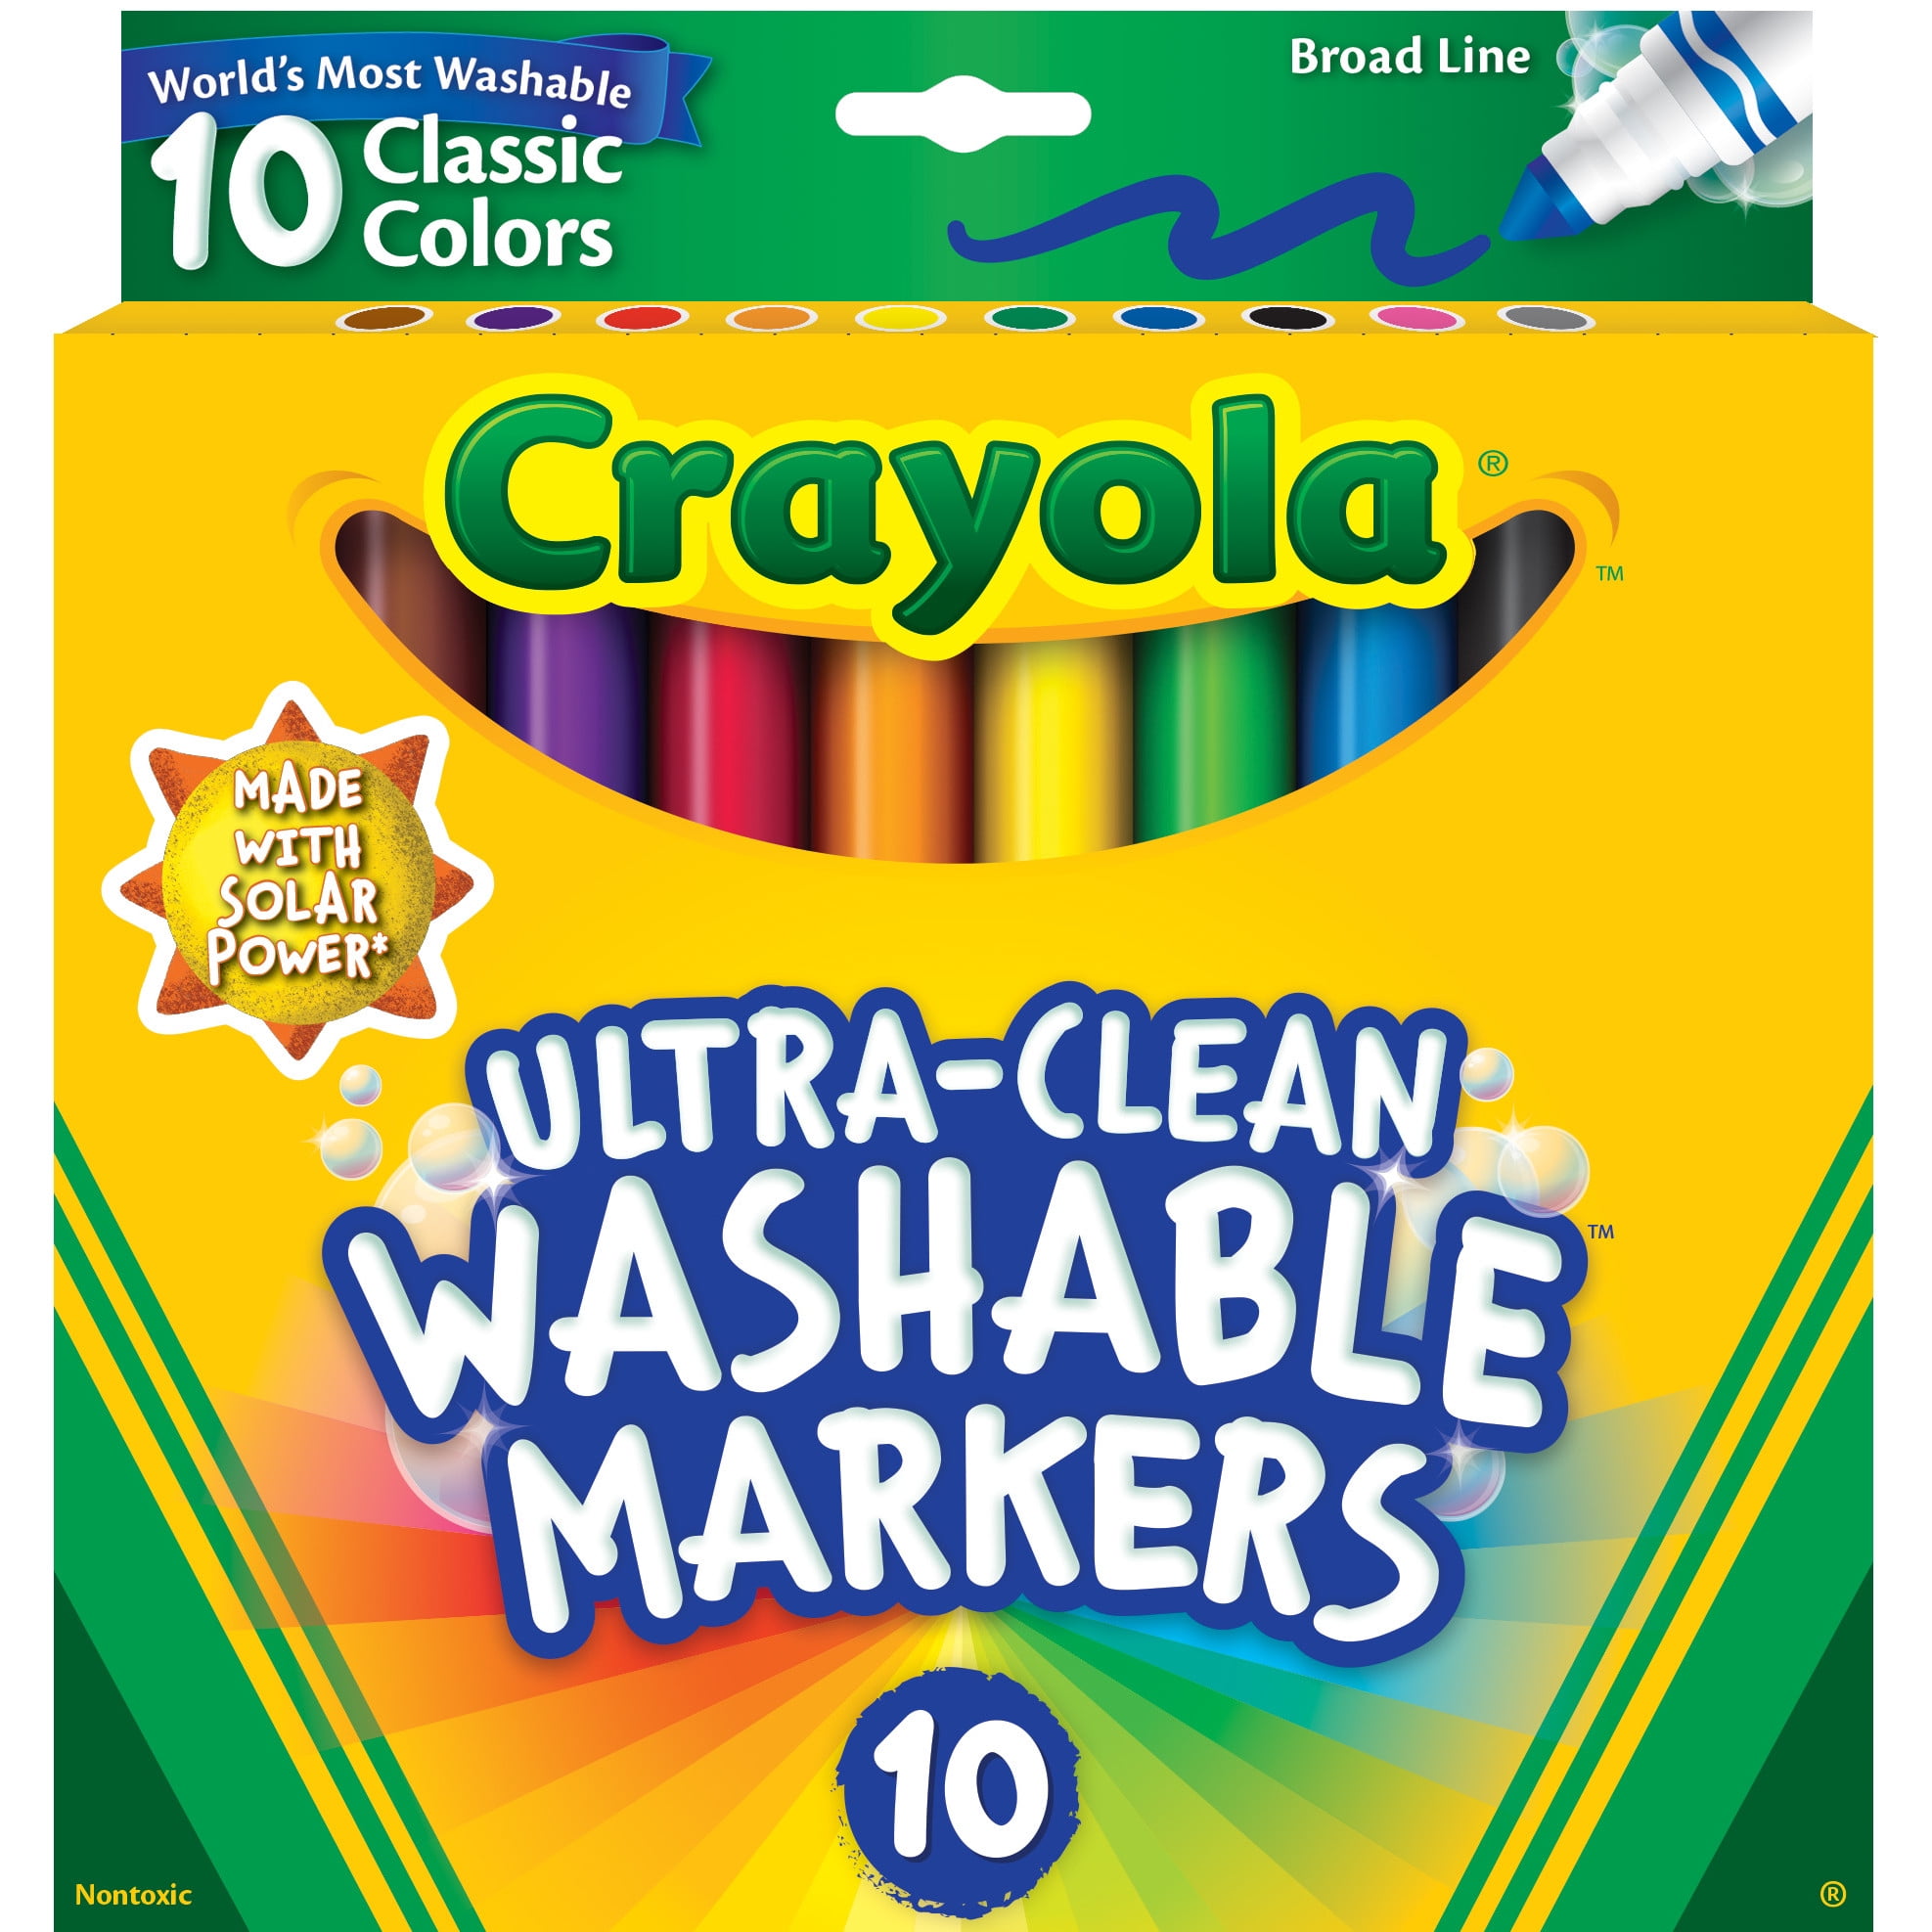 Crayola Ultra-Clean Washable Broad Line Markers, School Supplies, Stocking Stuffers, 10 Count